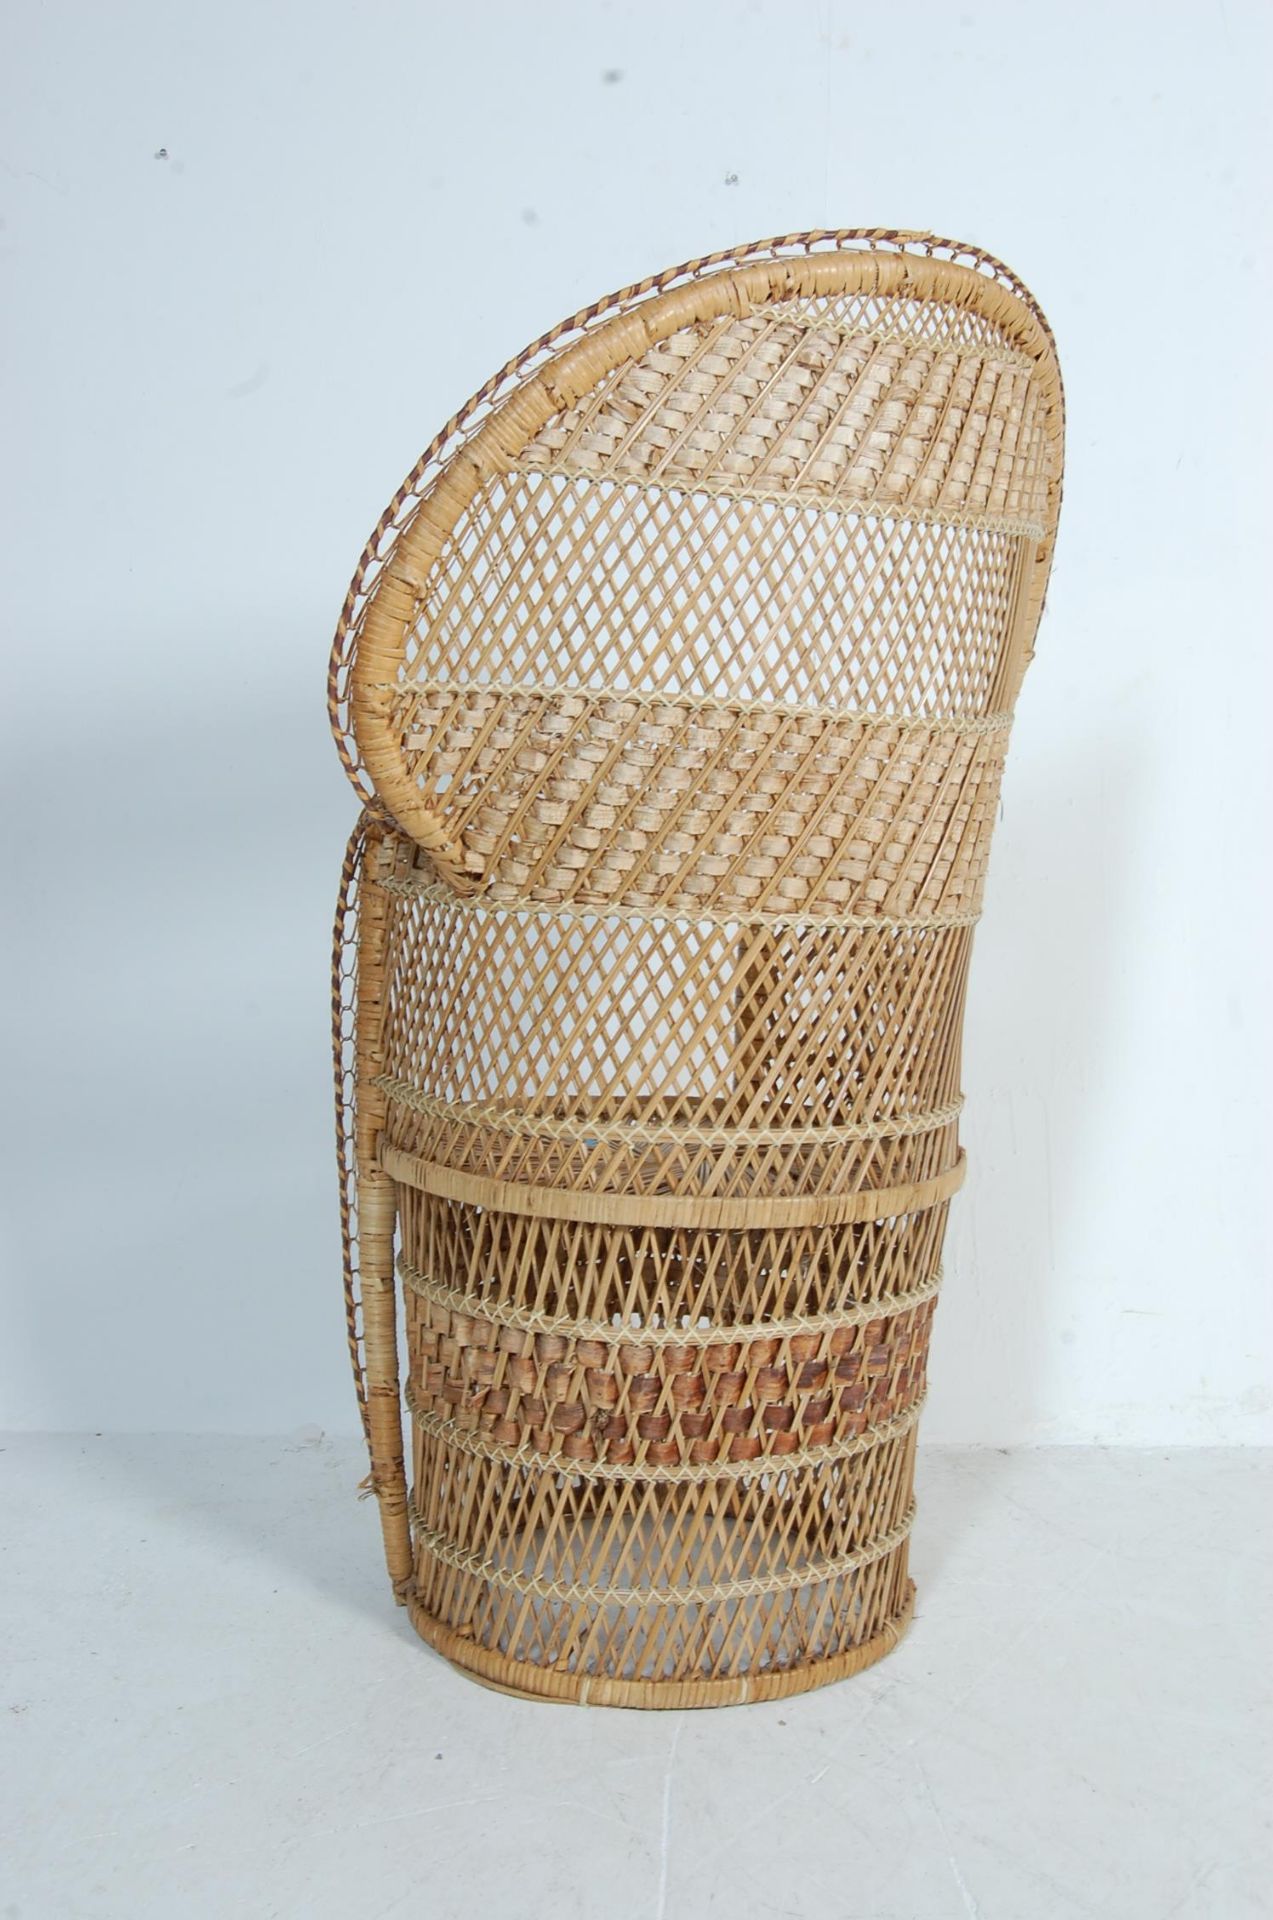 VINTAGE RETRO WICKER CONSERVATORY CHAIR - Image 6 of 6